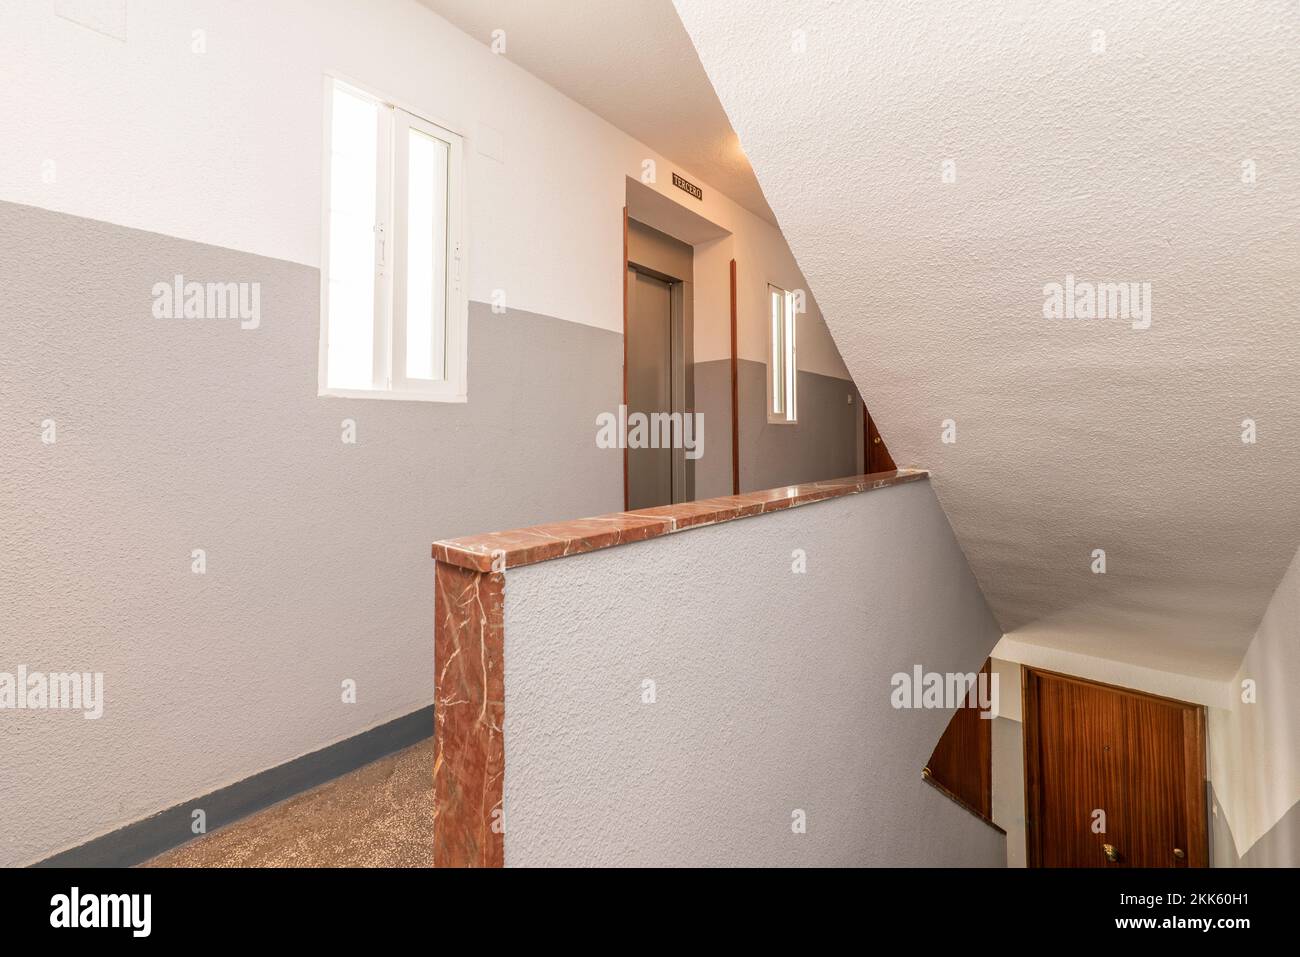 Landing of a residential apartment building with a staircase with reddish terrazzo floors, railings with red marble and a gray metal elevator Stock Photo